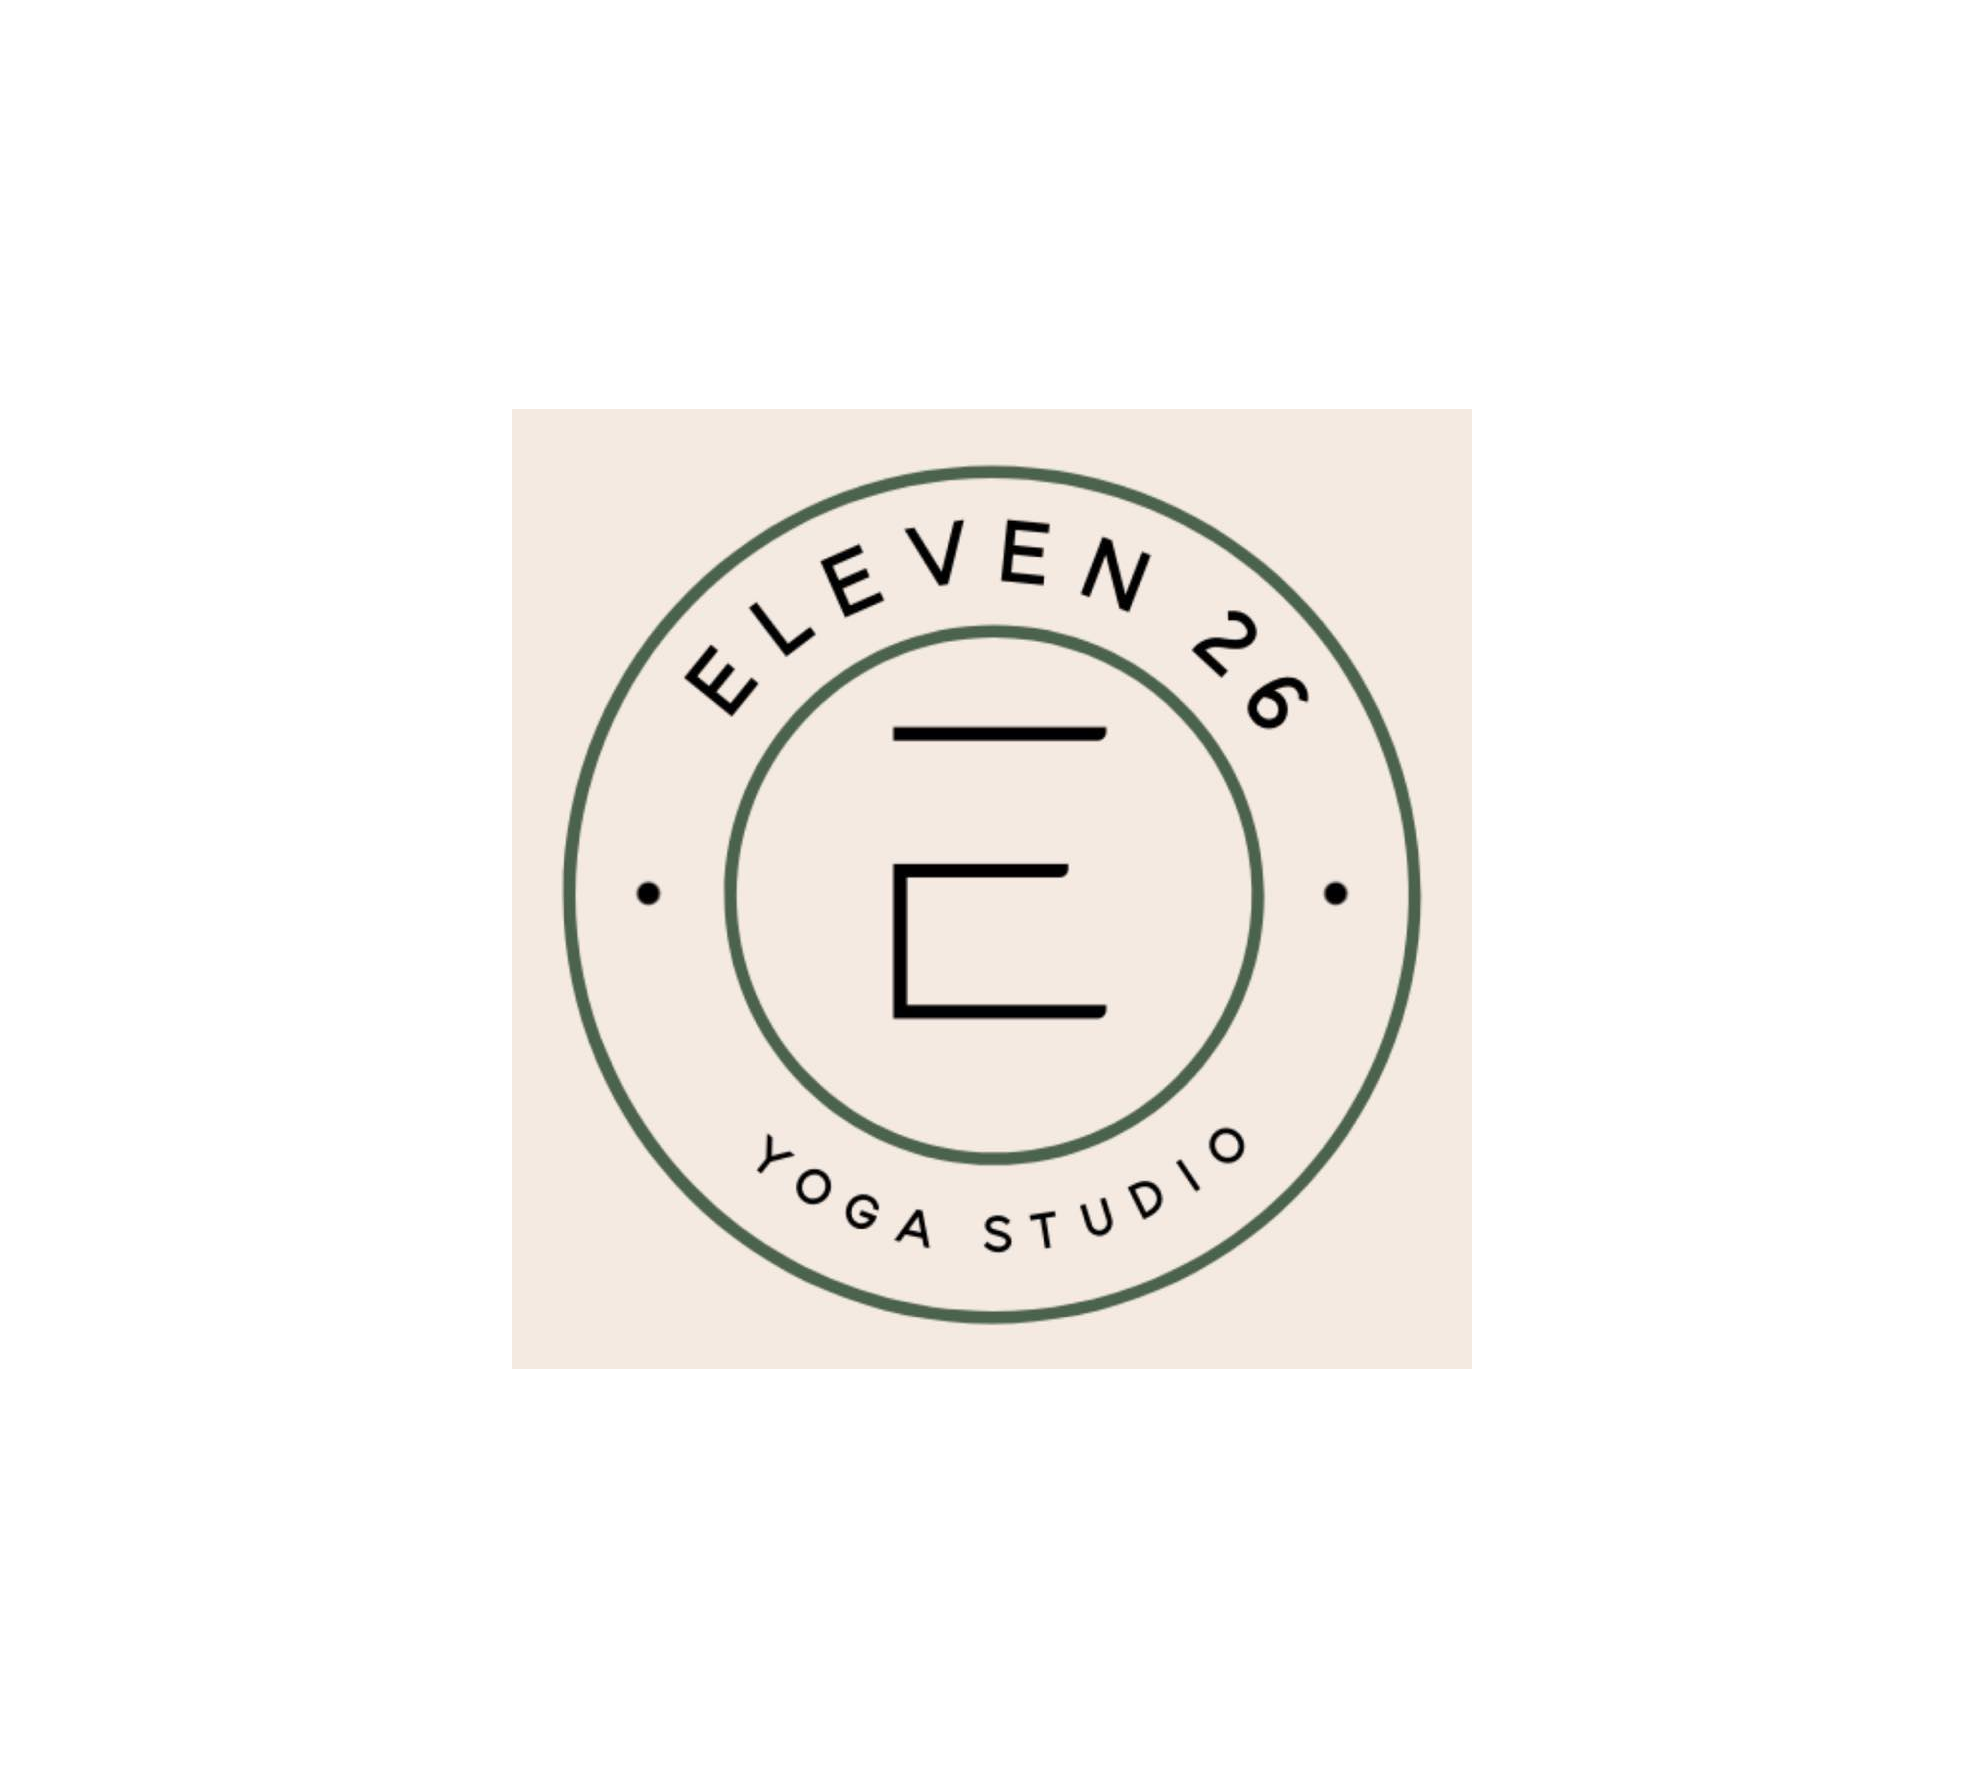 Inviting Curiosity + Cultivating Community - Eleven26 Yoga